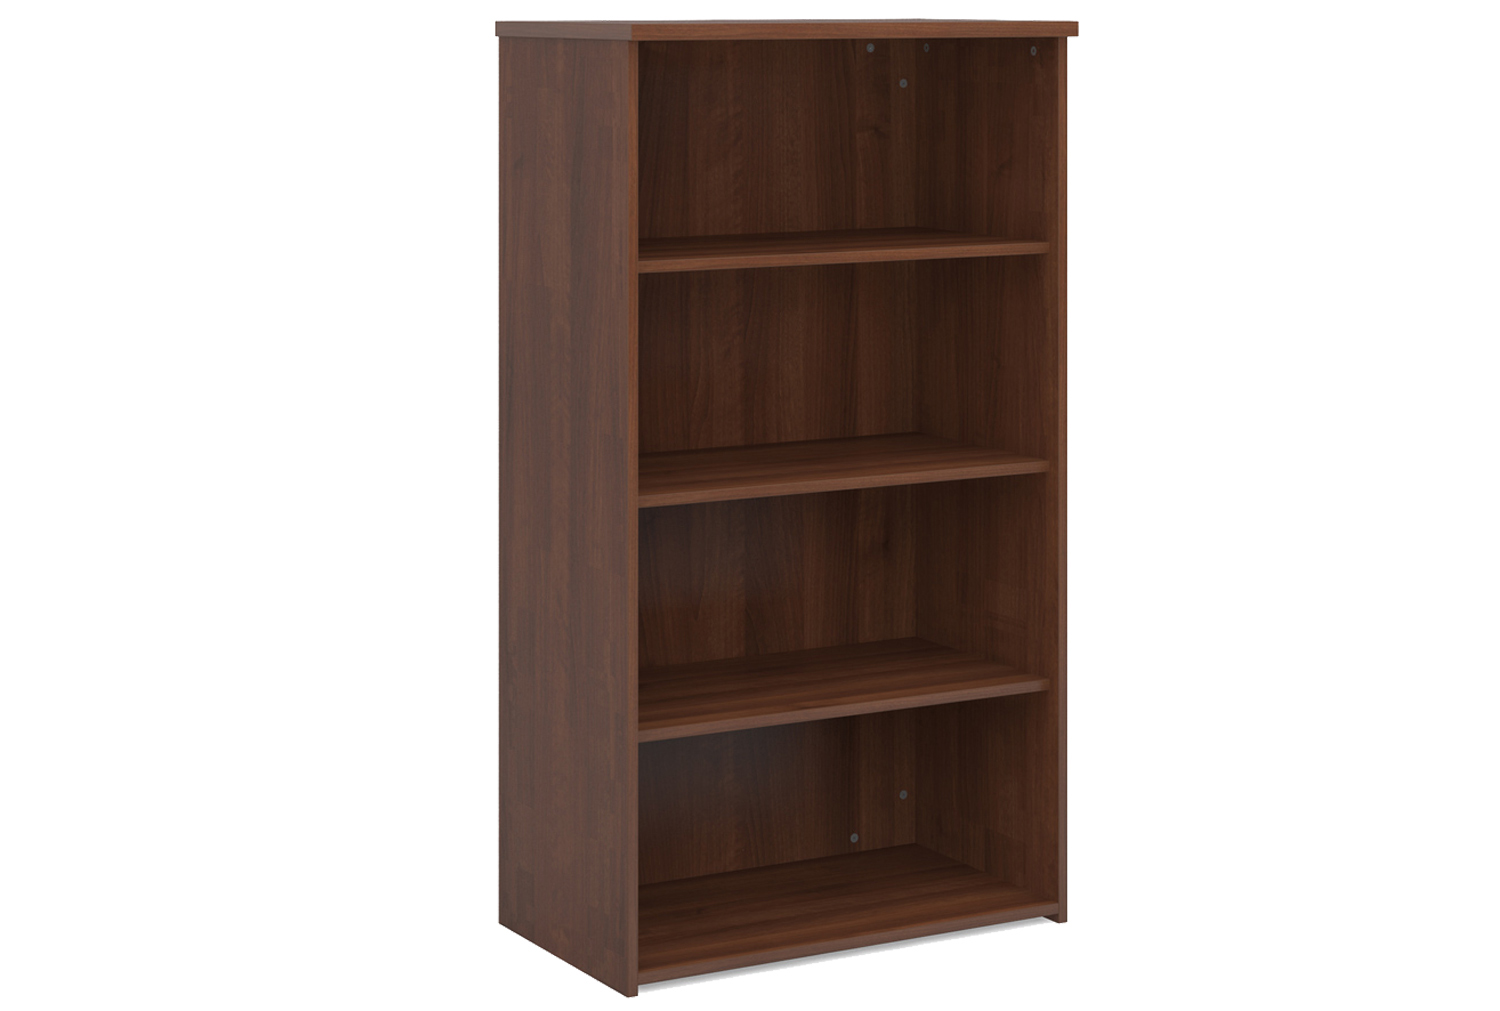 Thrifty Next-Day Office Bookcases Walnut, 3 Shelf - 80wx47dx144h (cm), Express Delivery